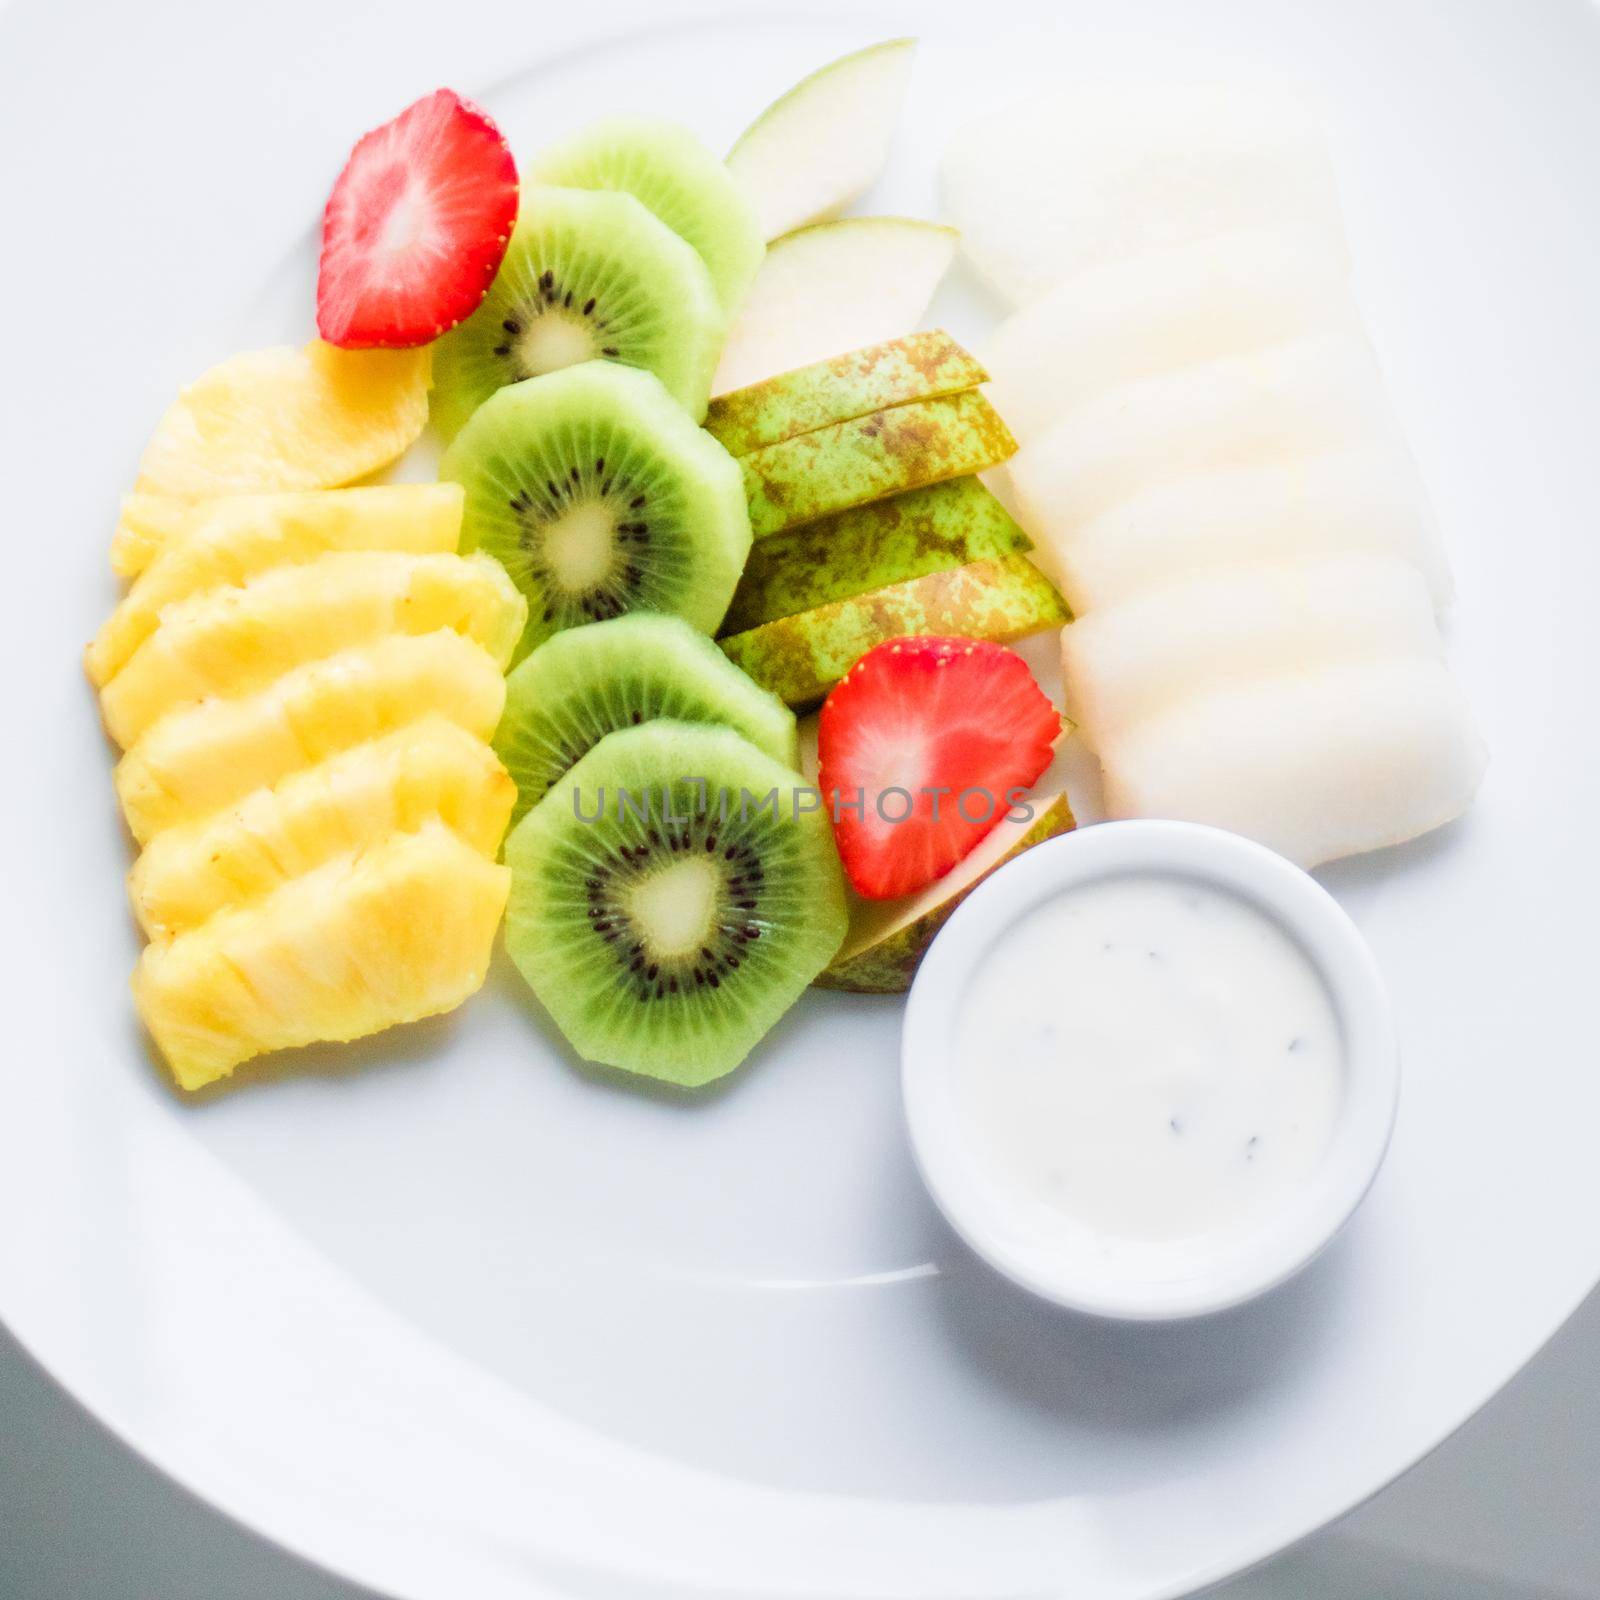 fruit plate served - fresh fruits and healthy eating styled concept, elegant visuals